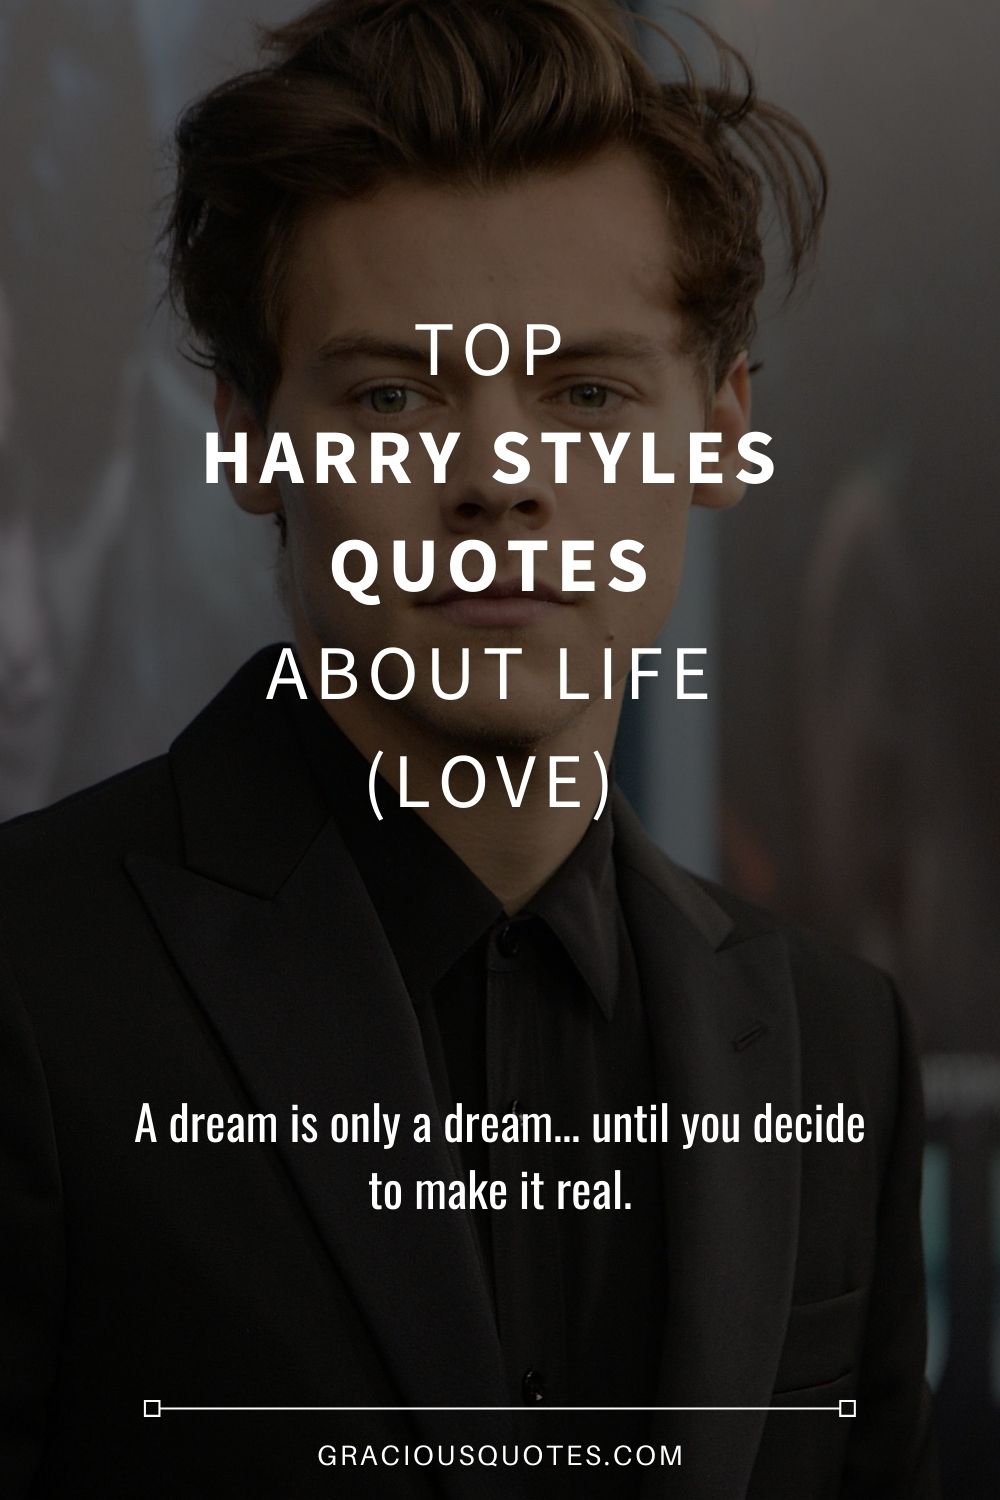 The 10 Best Harry Styles Quotes from His Music